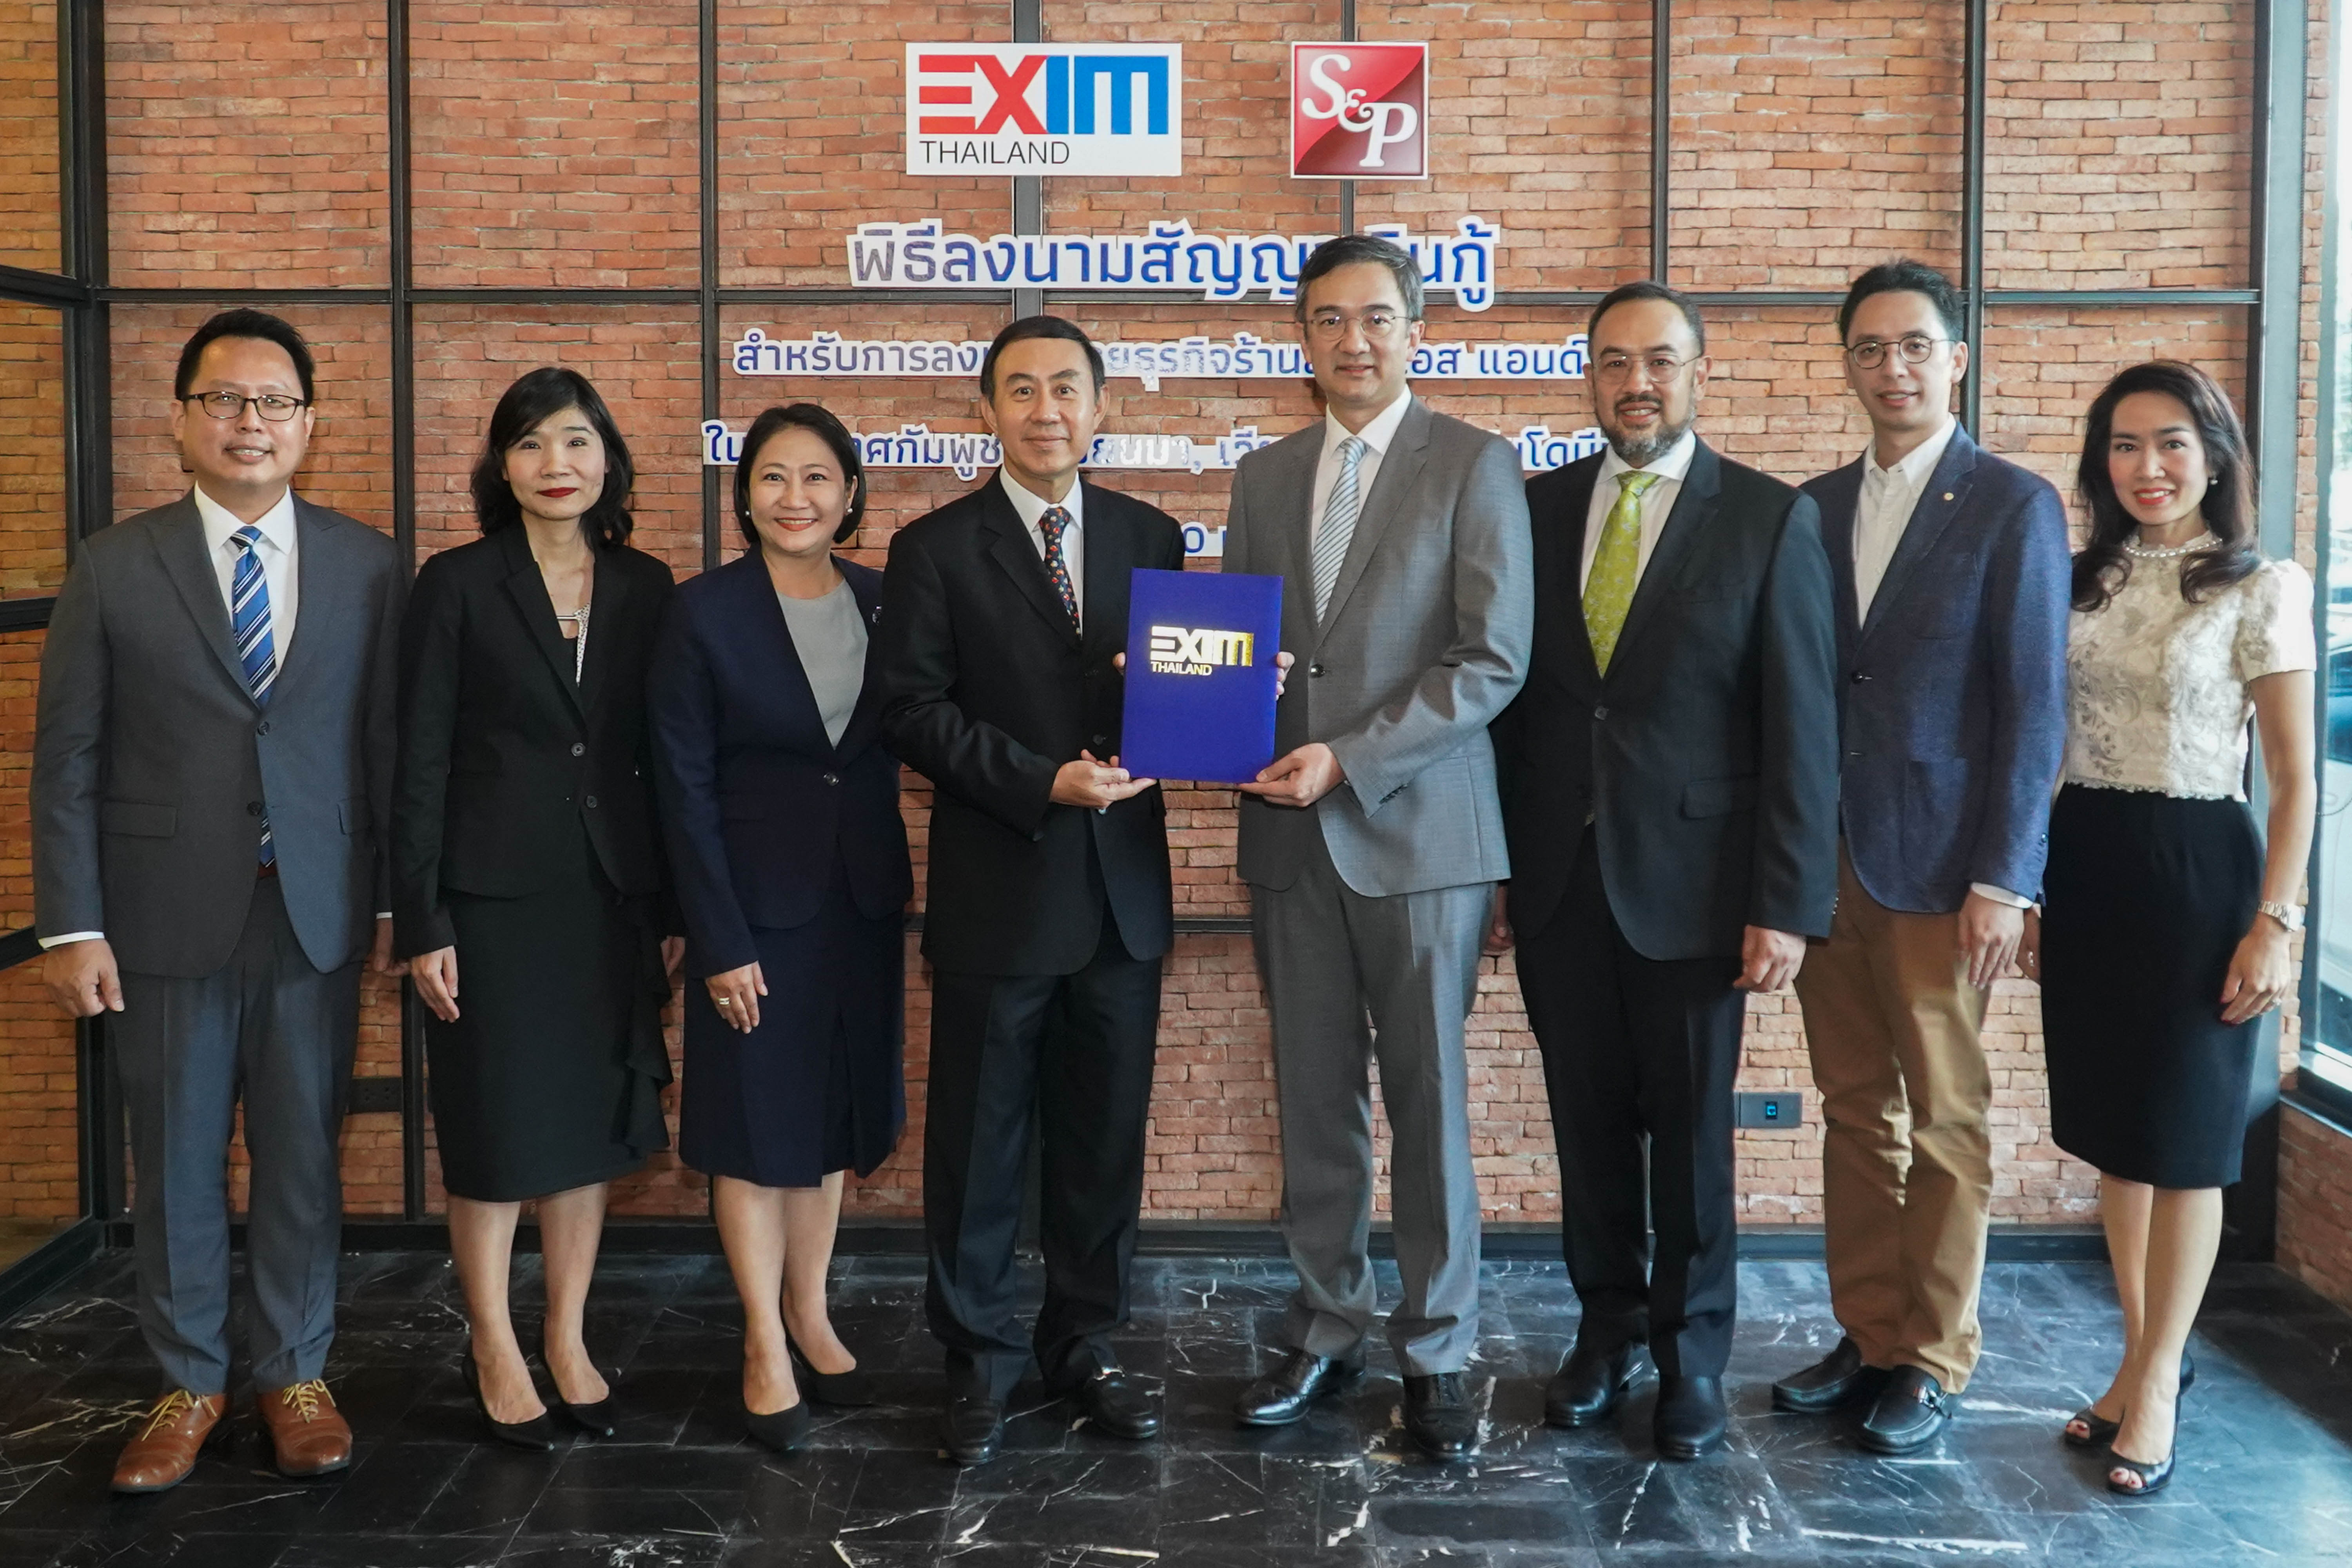 EXIM Thailand Supports S&P’s Expansion of Domestic Factories and Restaurants in ASEAN